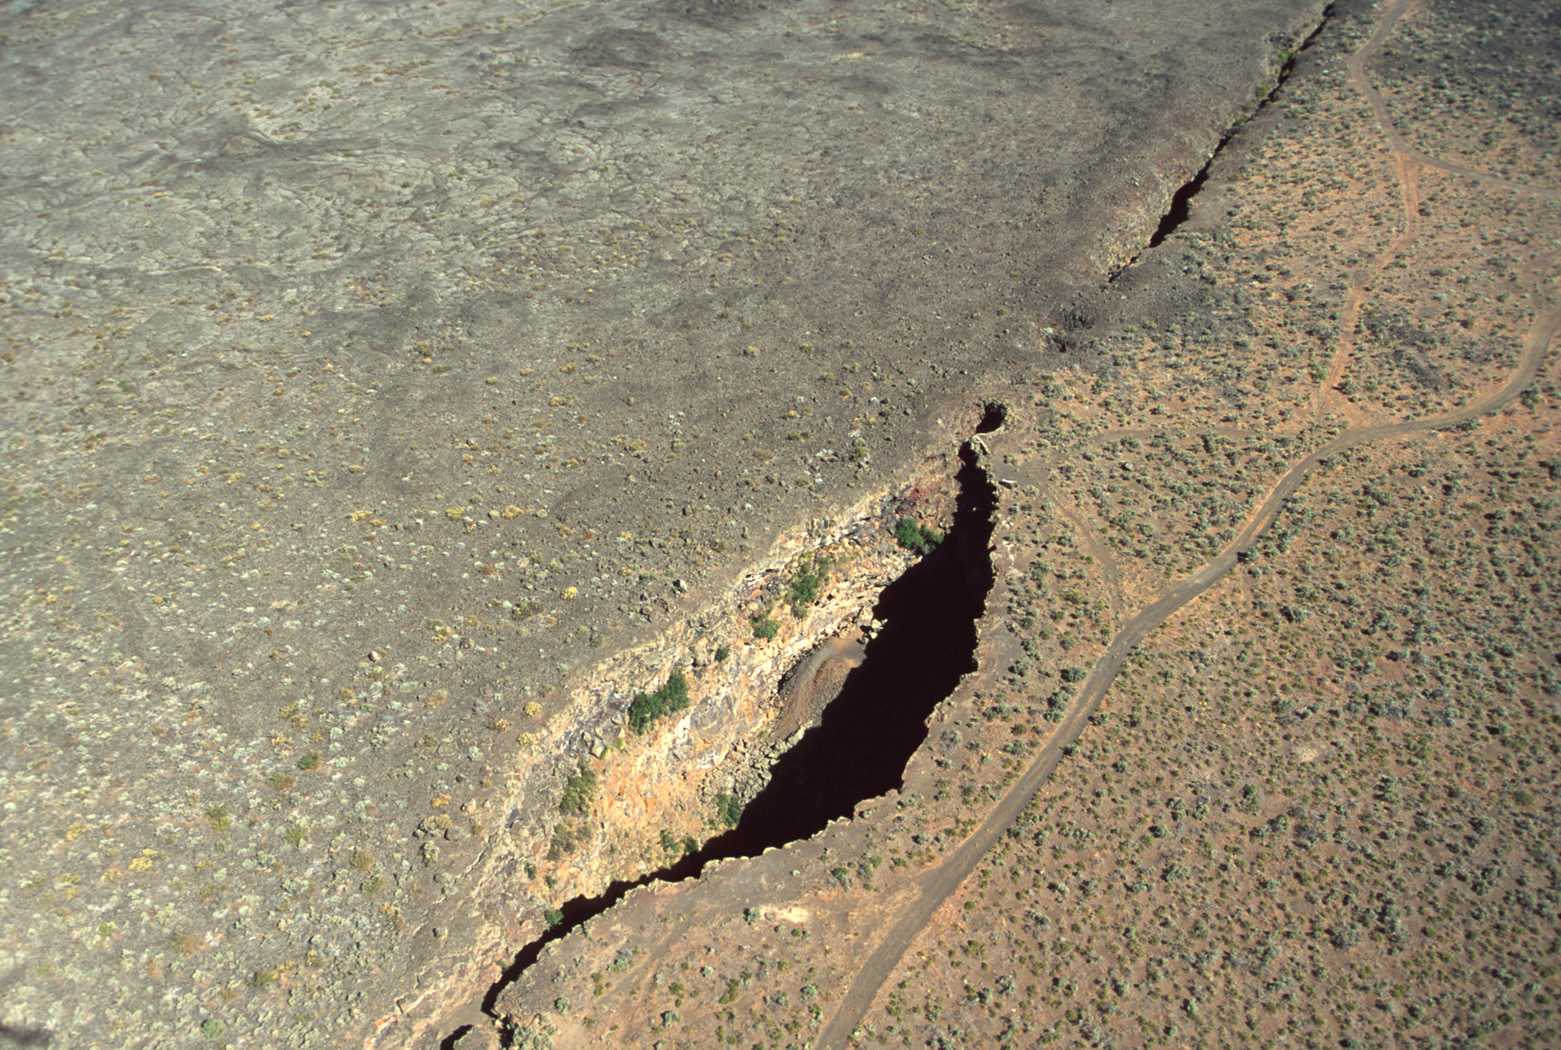 Kings Bowl and Great Rift from air. King's Bowl is a phreatic explosion pit 280 feet (85 m) long, 100 feet (30 m) wide, and 100 feet (30 m) deep, caused by lava coming in contact with groundwater producing a steam explosion 2,200 years ago. (NPS photo)